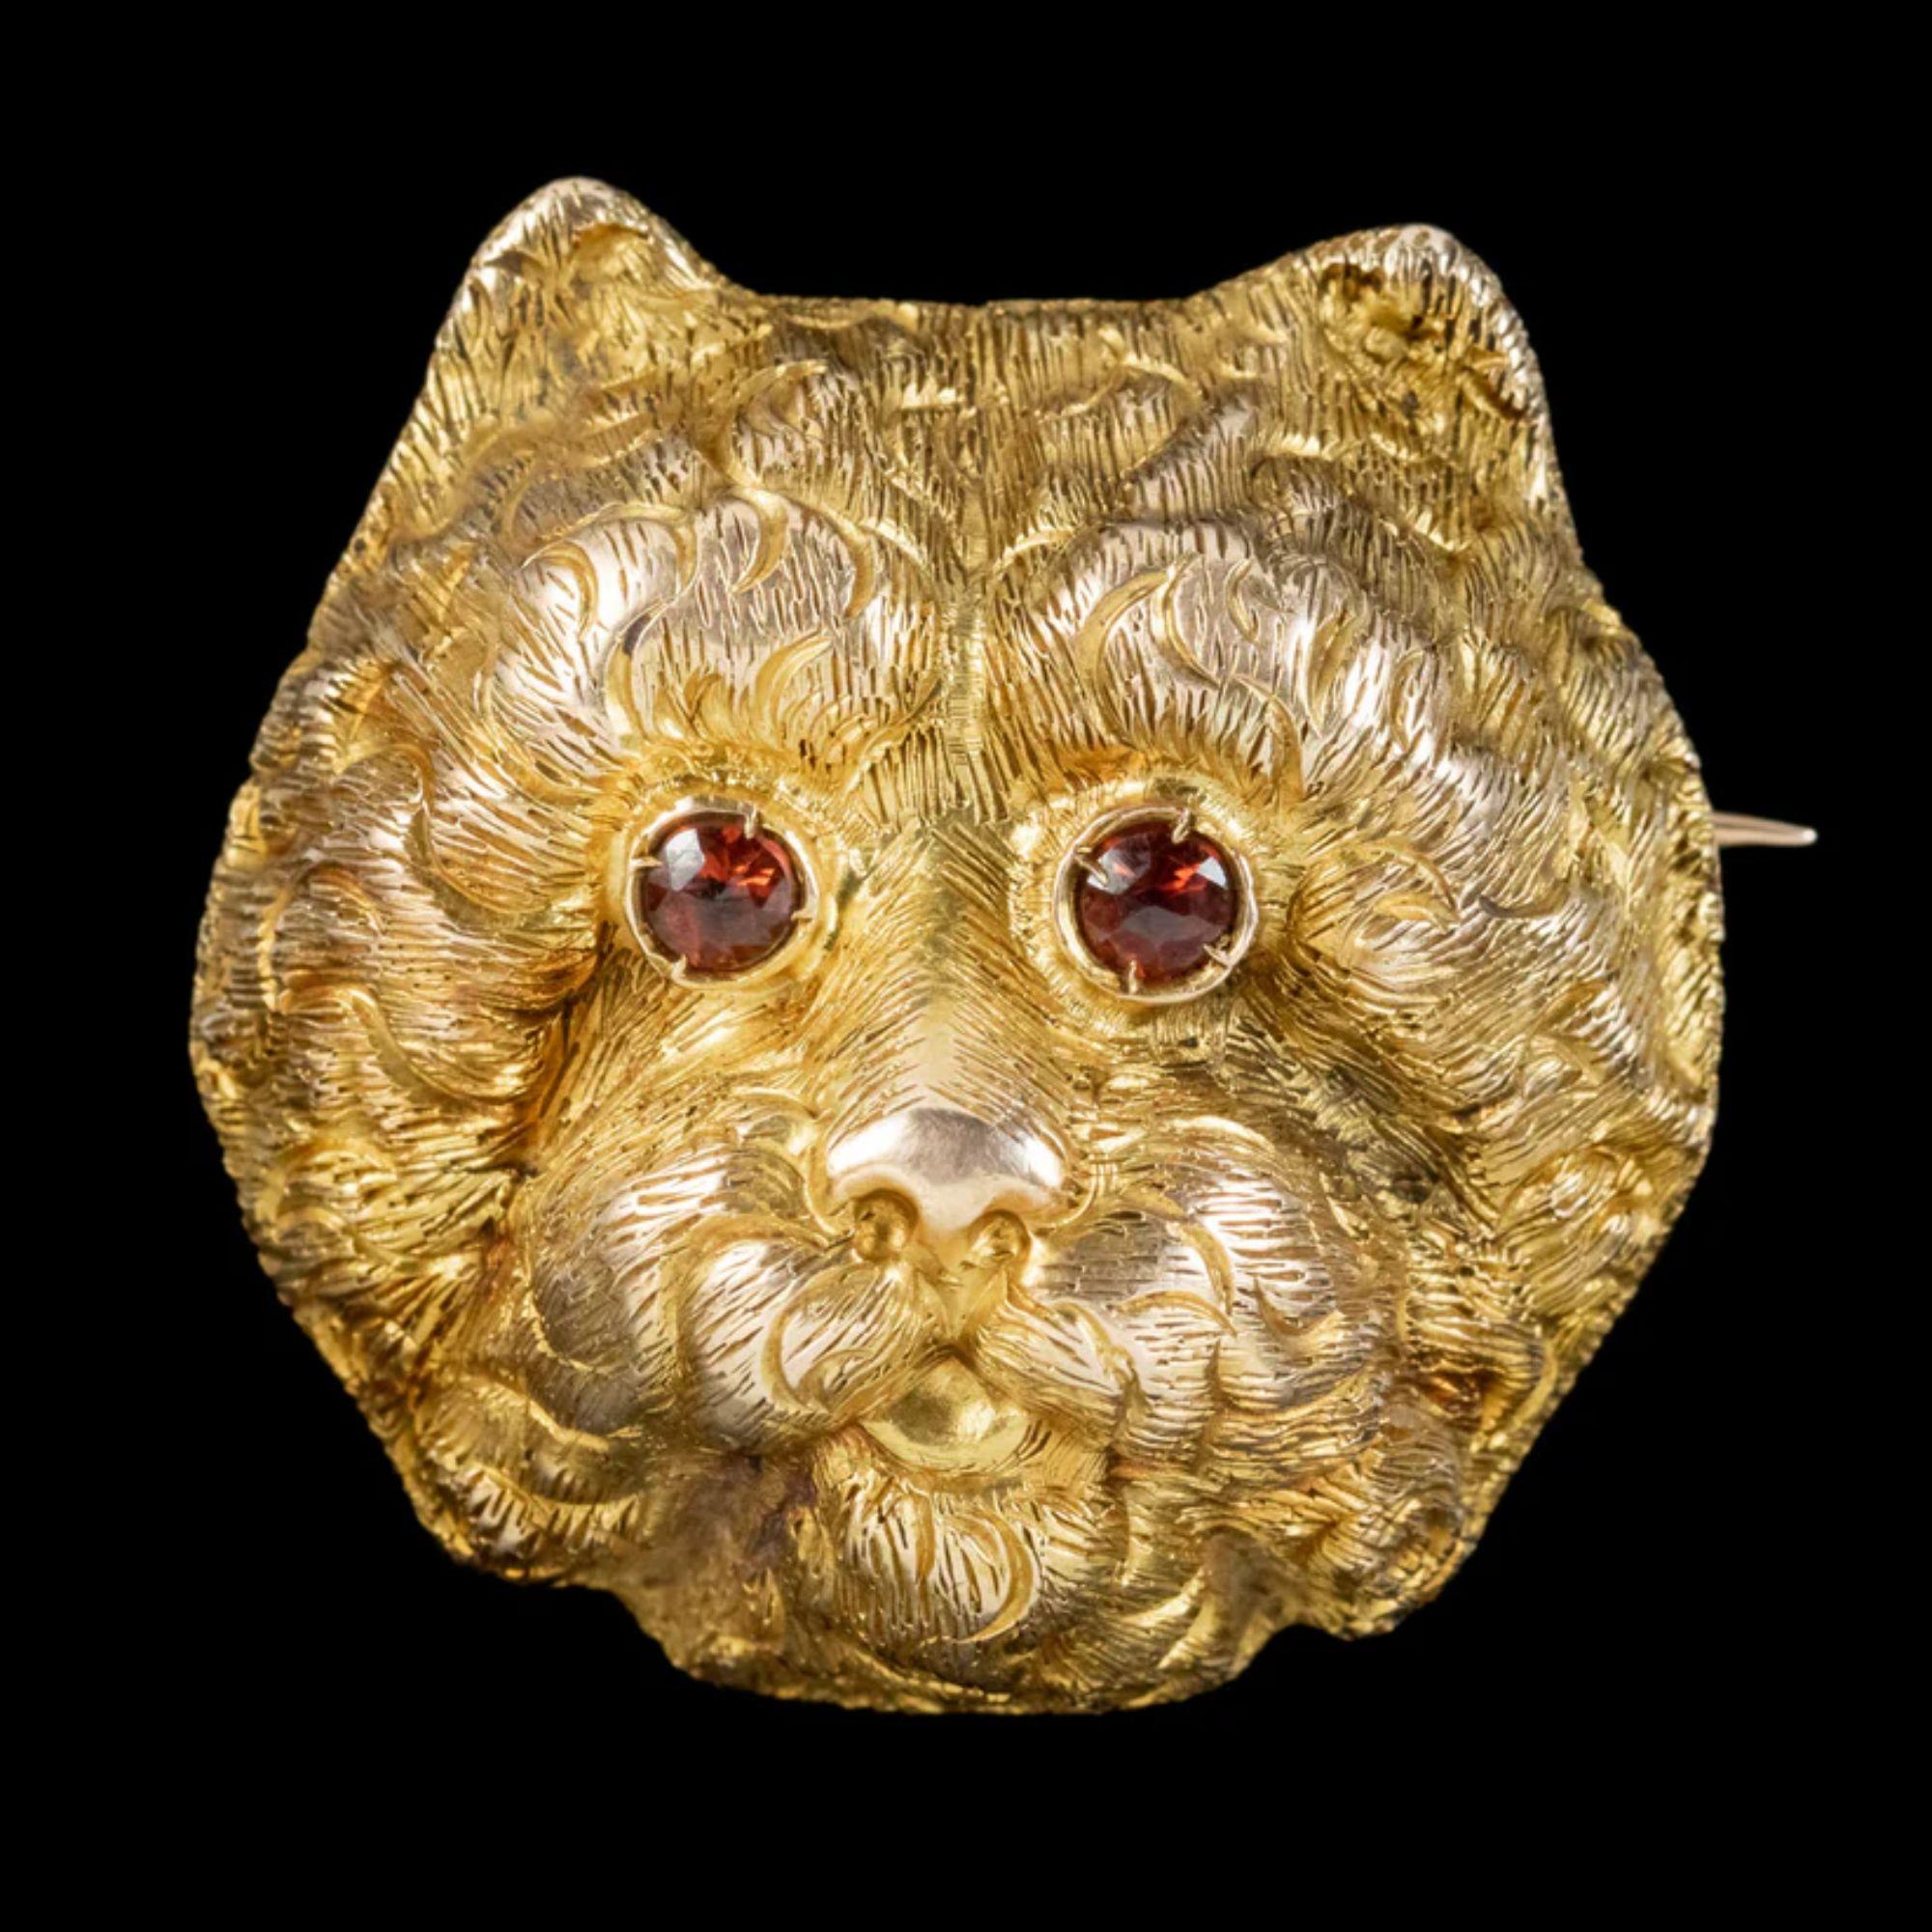 A wonderful antique French brooch from the late 19th century, depicting the face of an adorable, curly haired dog with two red, rose cut garnet eyes (approx. 0.15ct each).

It’s fashioned entirely in 18ct gold and displays exquisite, chased